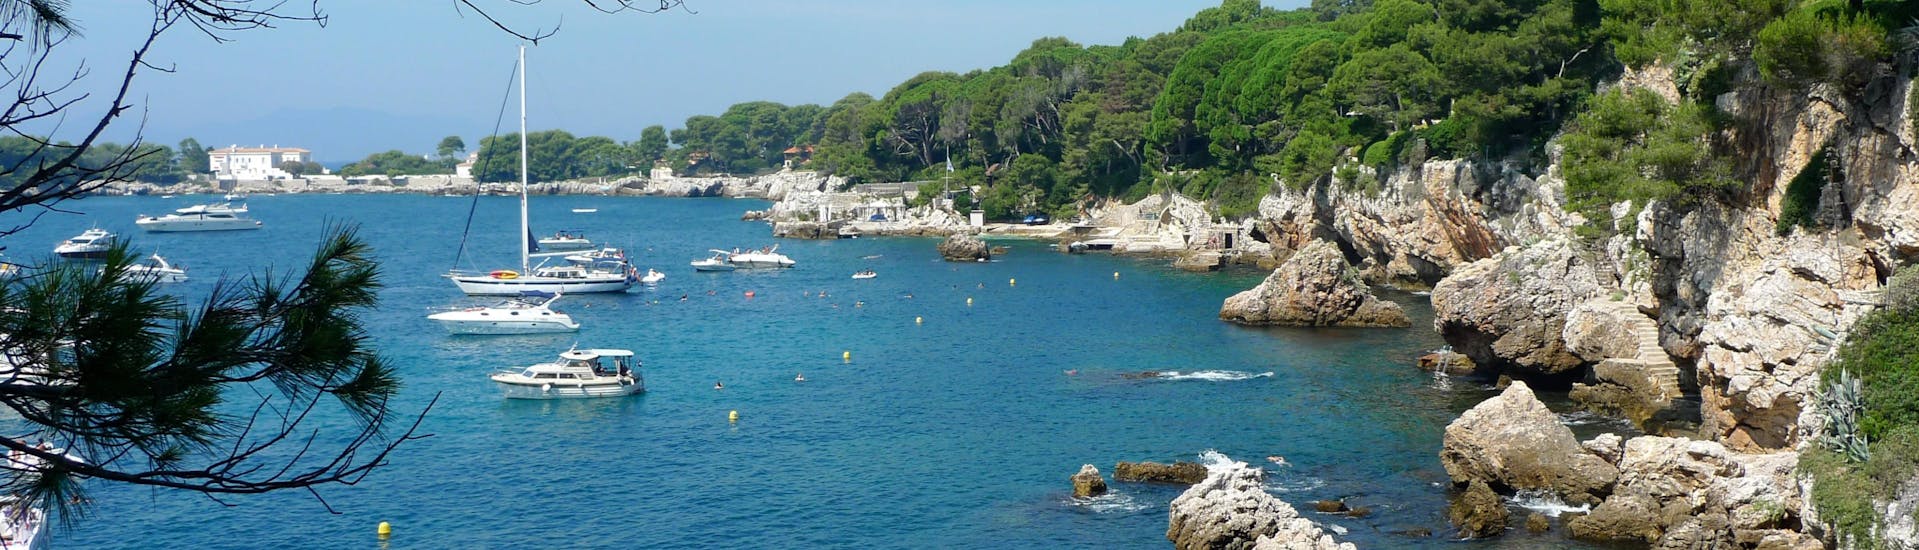 Boats are anchored in a quiet bay of Cap d'Antibes which can be admired during a boat trip from Juan-les-Pins.